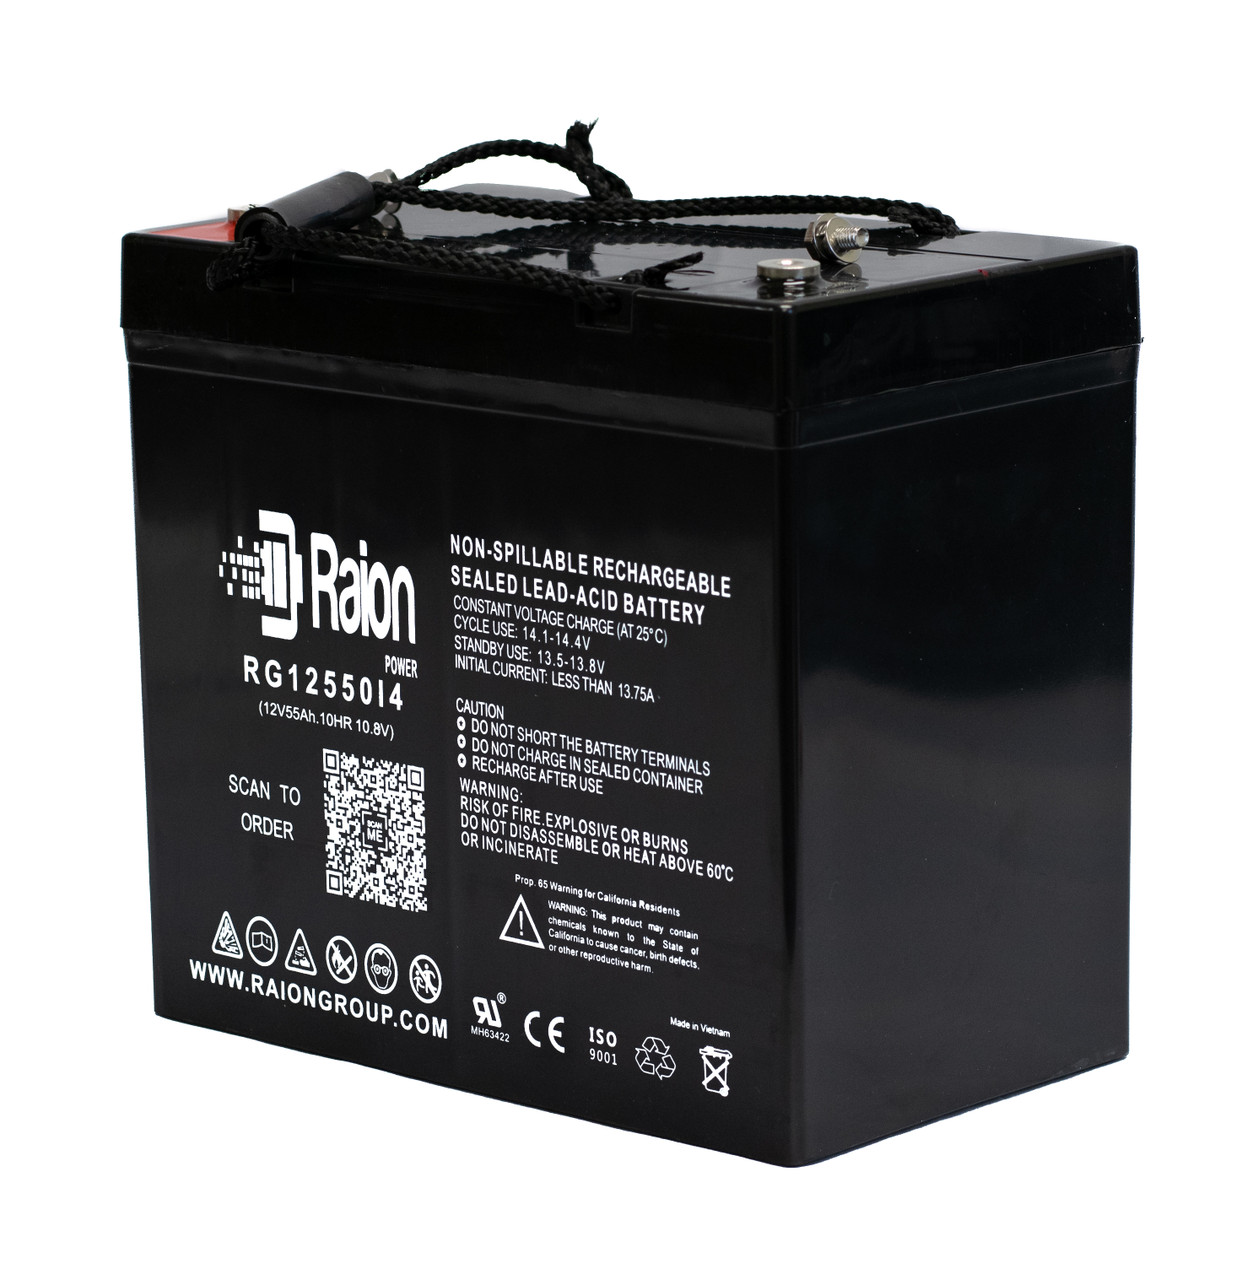 Raion Power Replacement 12V 55Ah Battery for Wangpin 6FM55 - 1 Pack